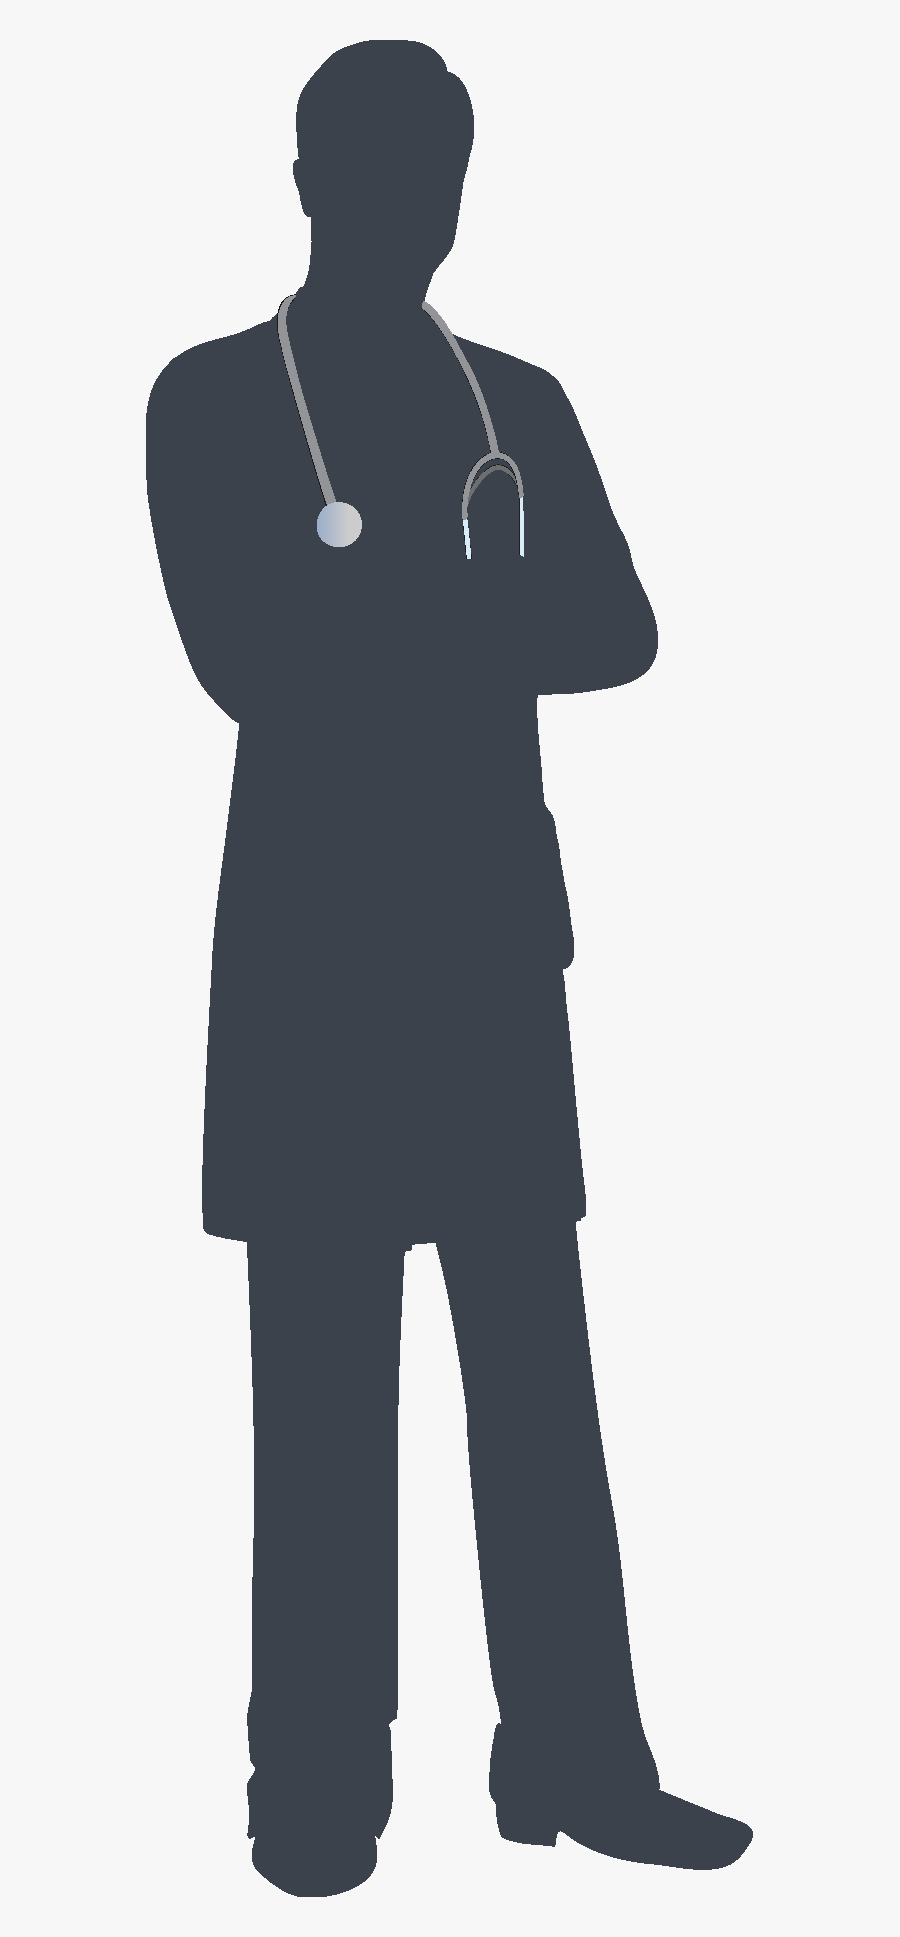 Doctor Png - Doctor Vector, Transparent Clipart